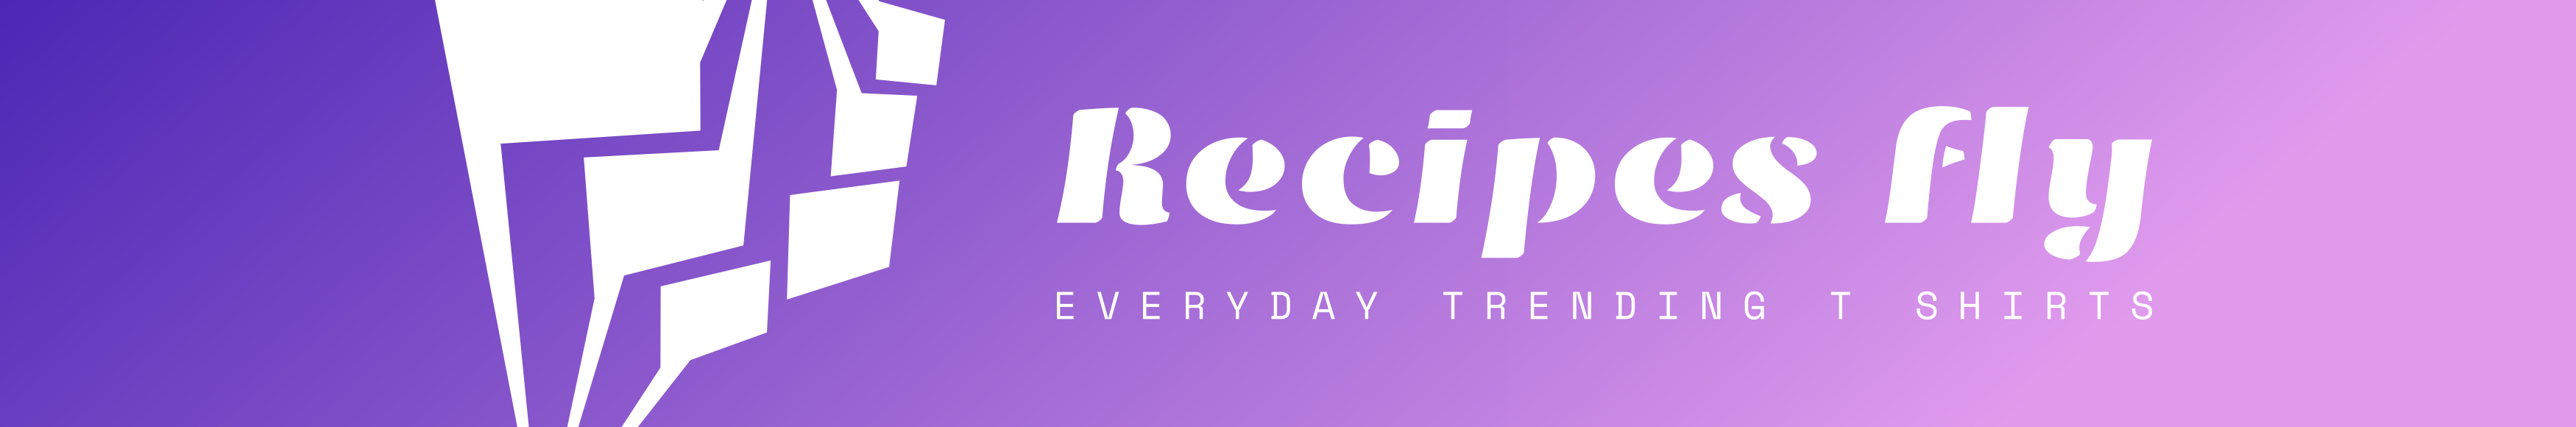 Recipes fly's profile banner